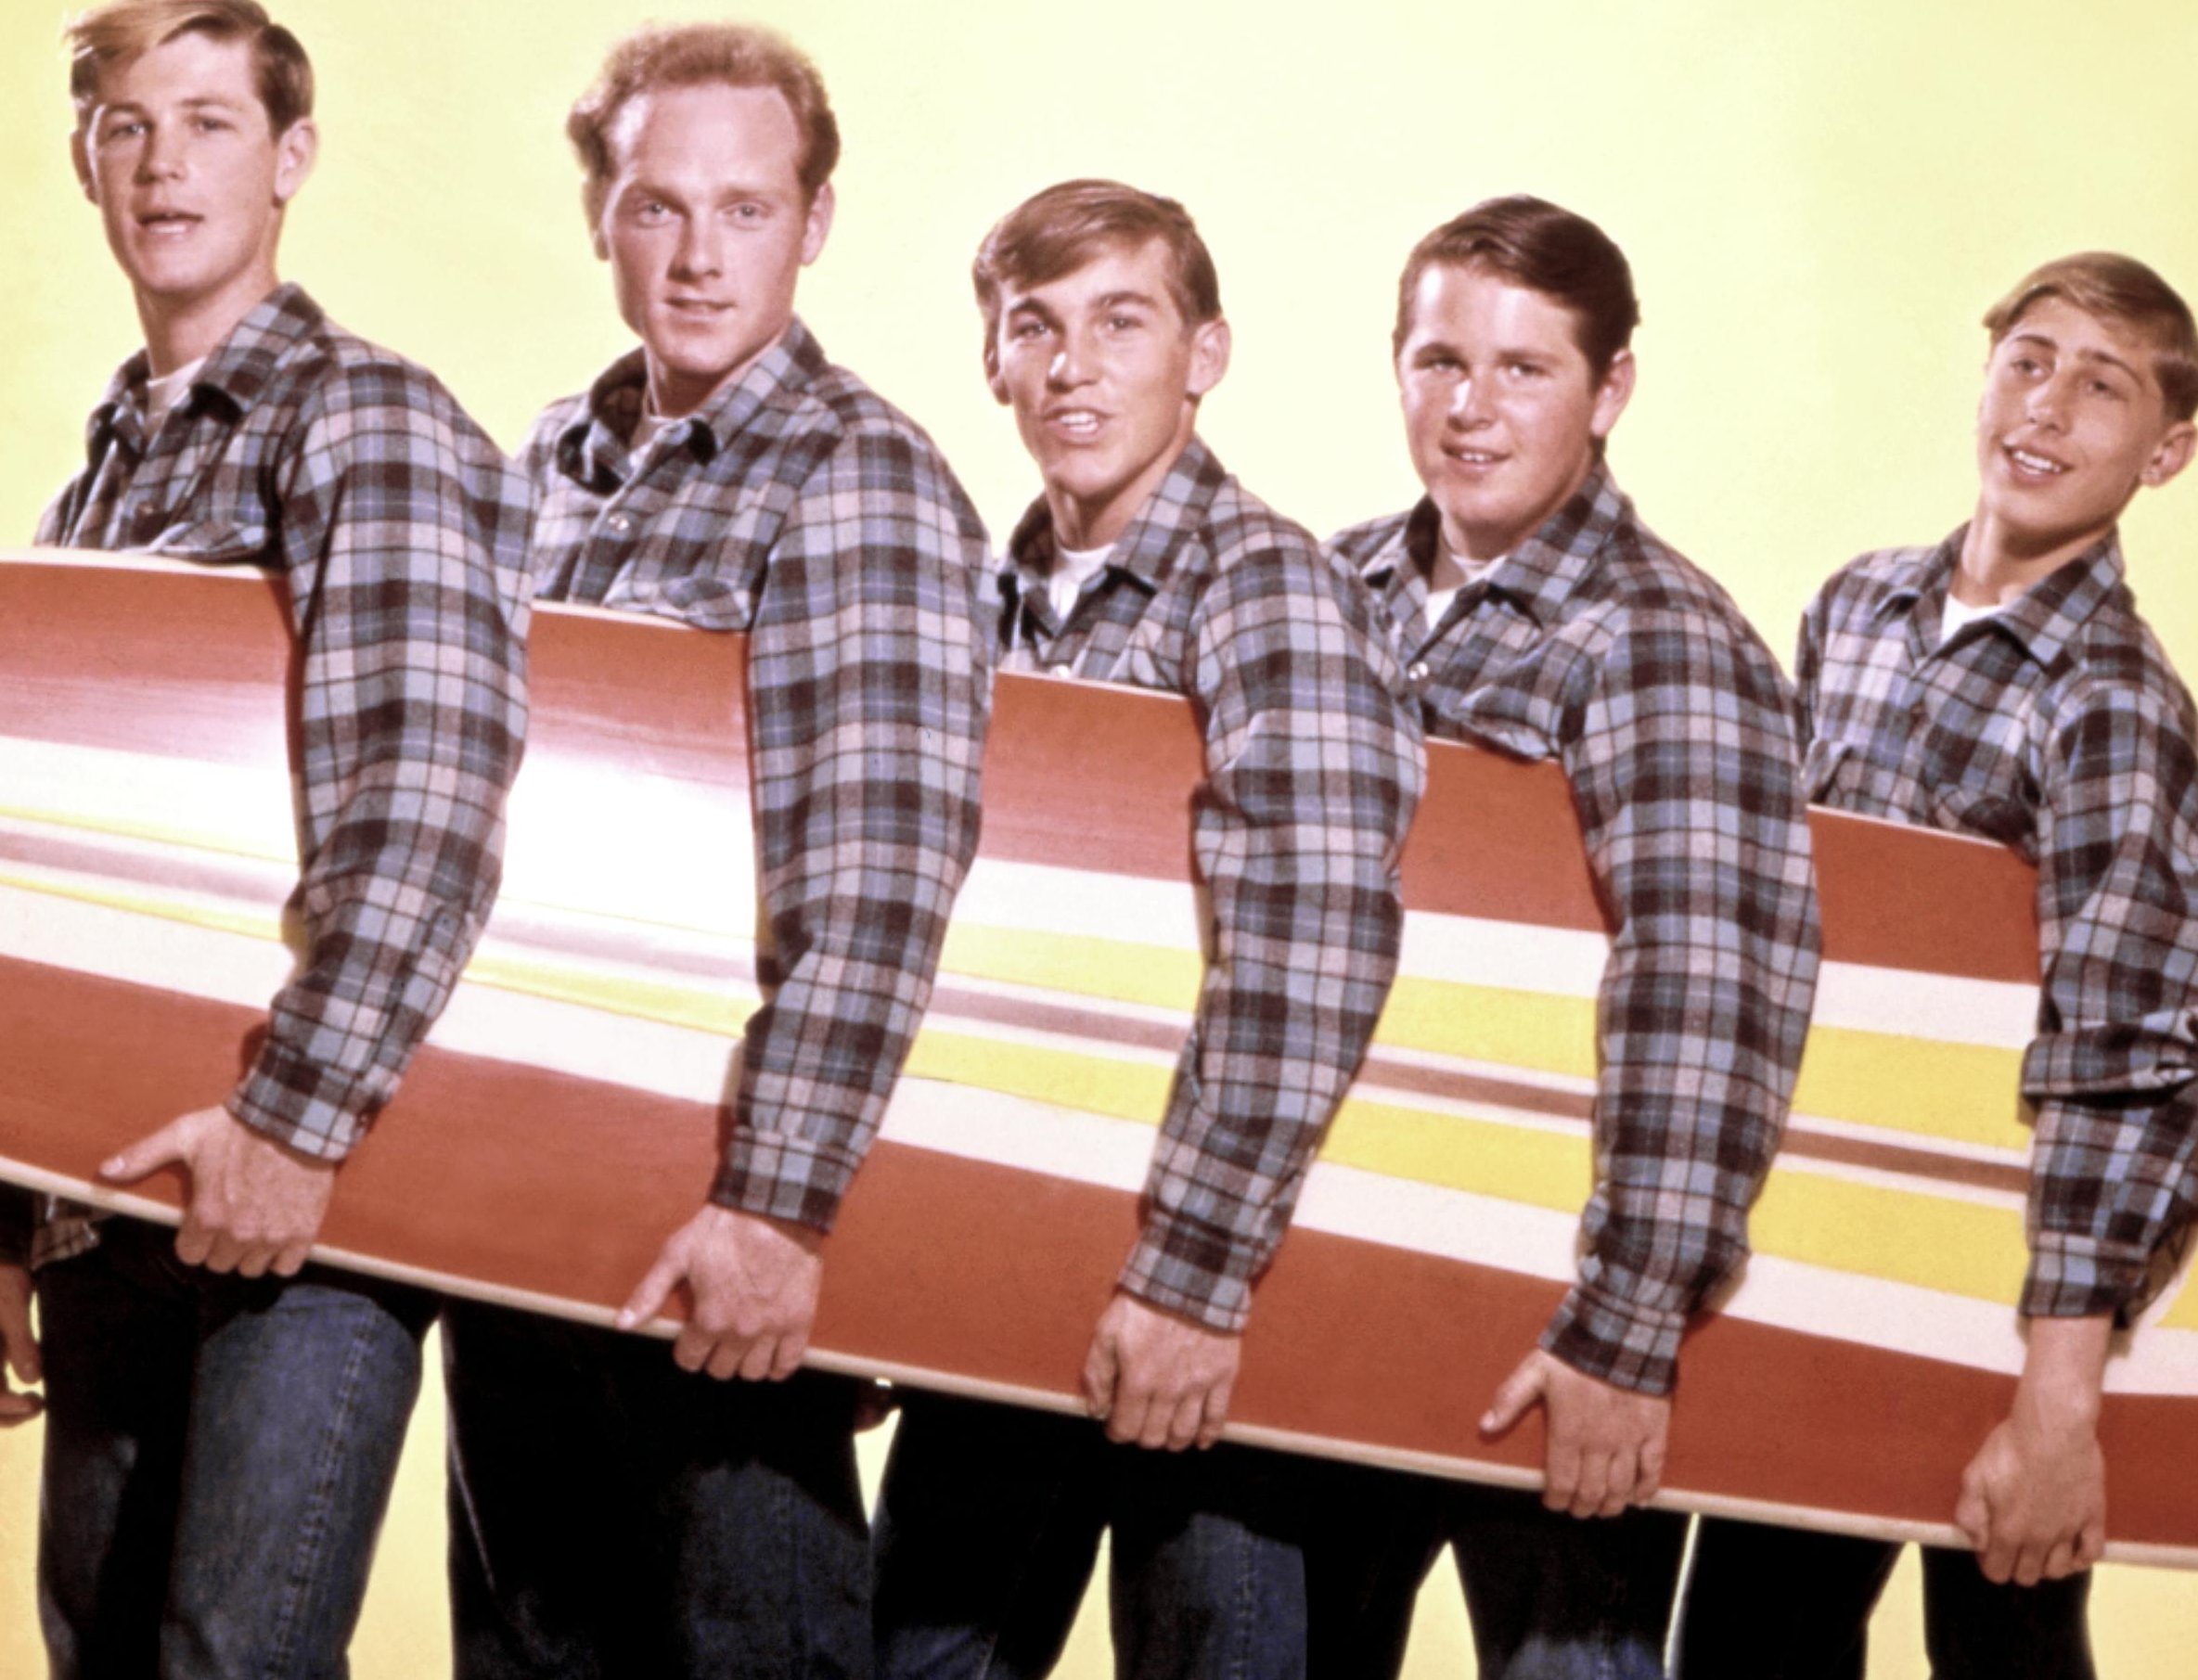 The start of the surf craze, The Beach Boys California Sound is on the move! Early publicity shot.